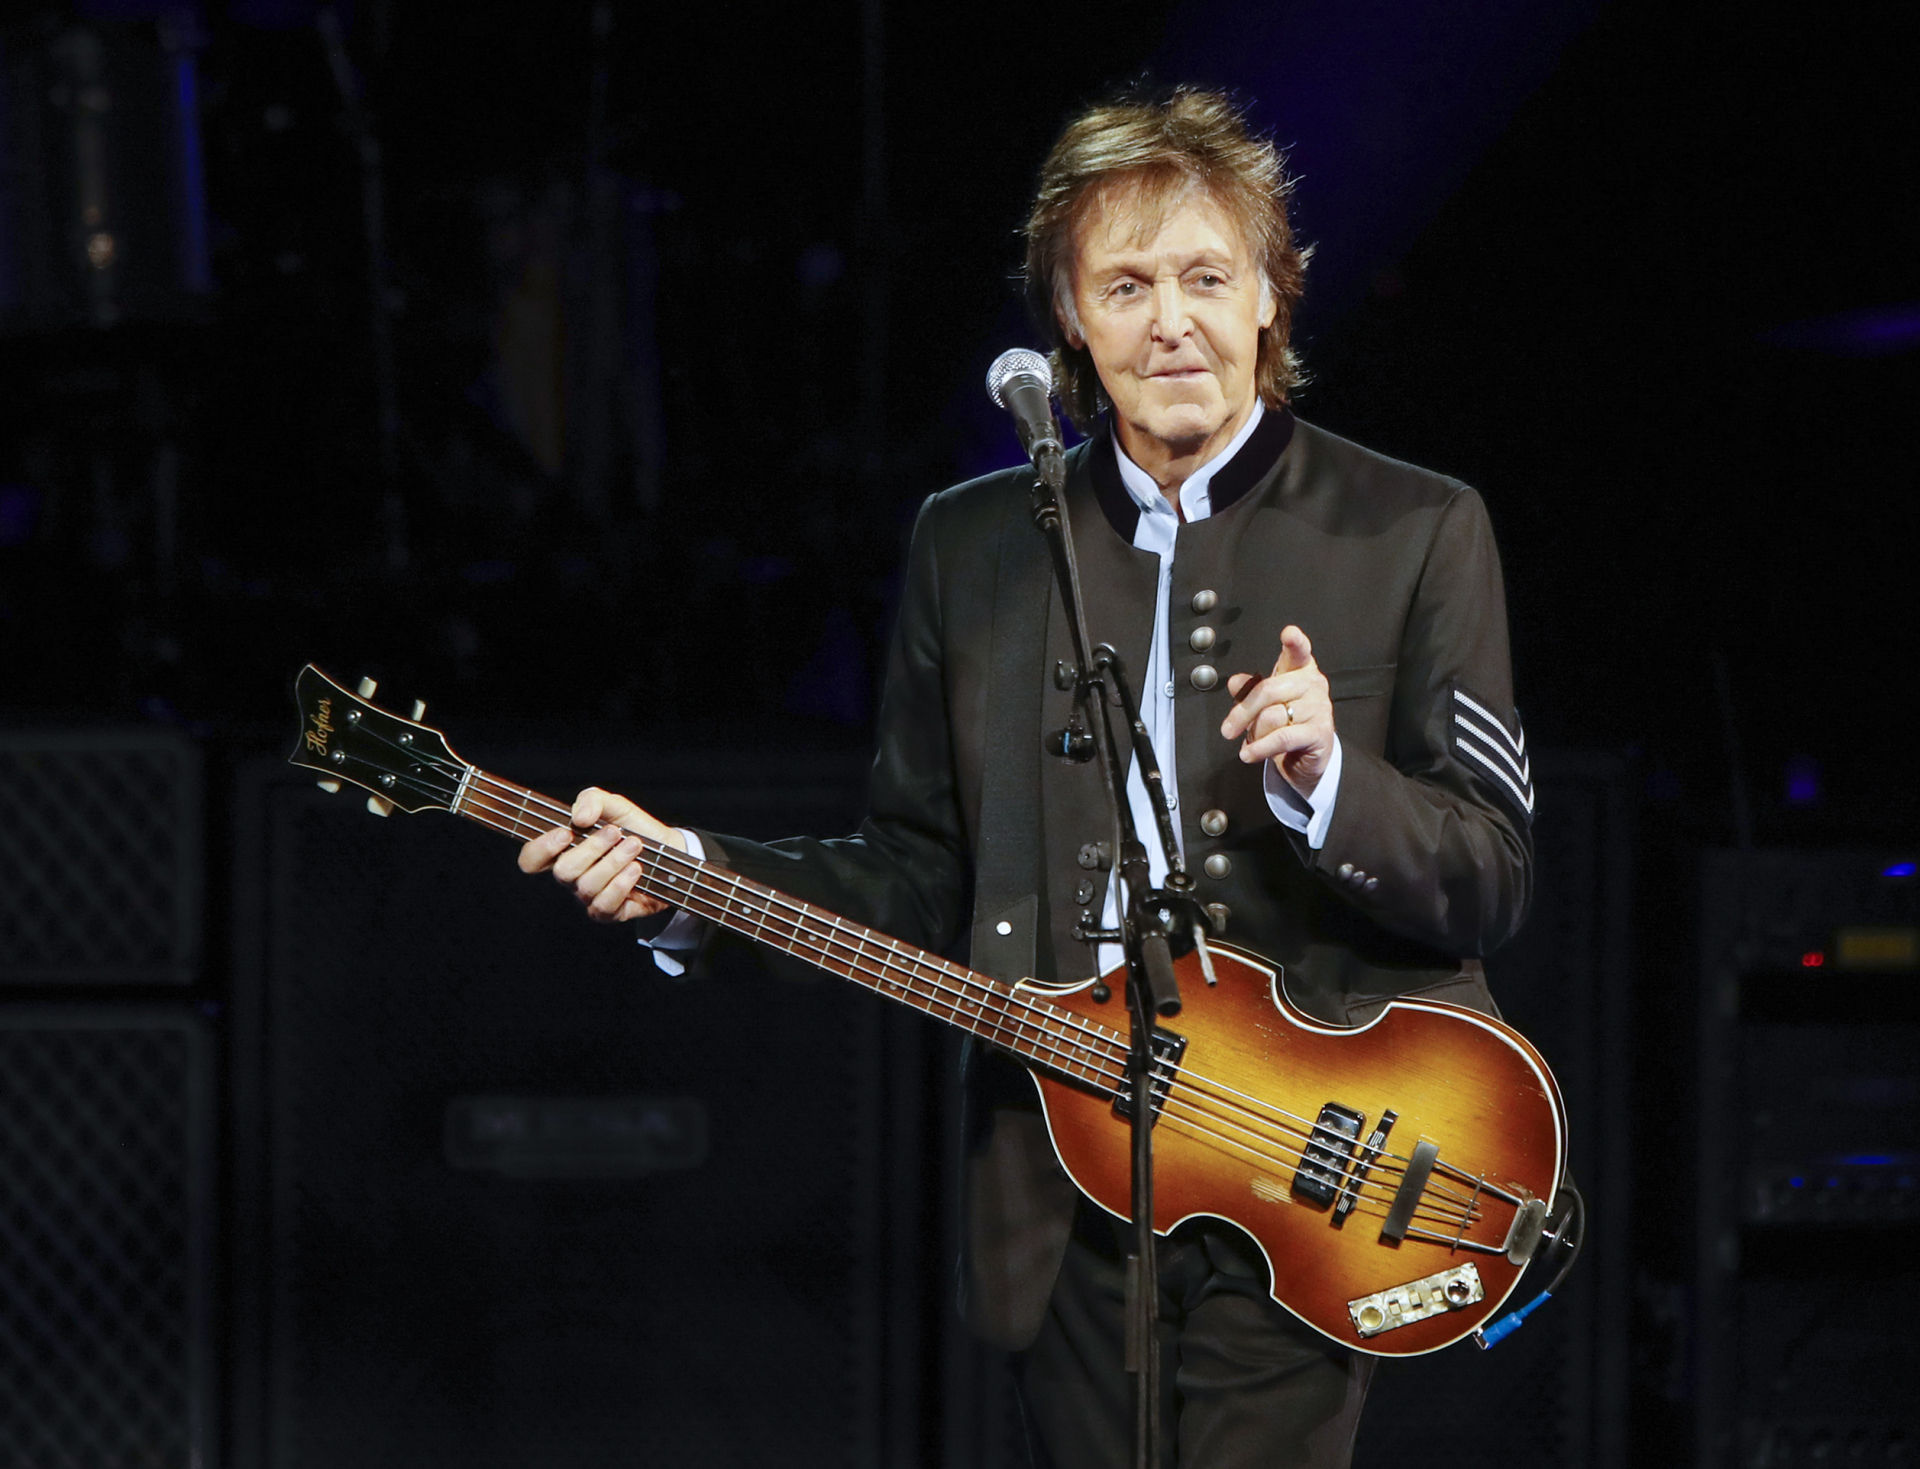 PAUL McCARTNEY: “HOME TONIGHT” / “IN A HURRY” TWO BRAND NEW SONGS OUT NOW